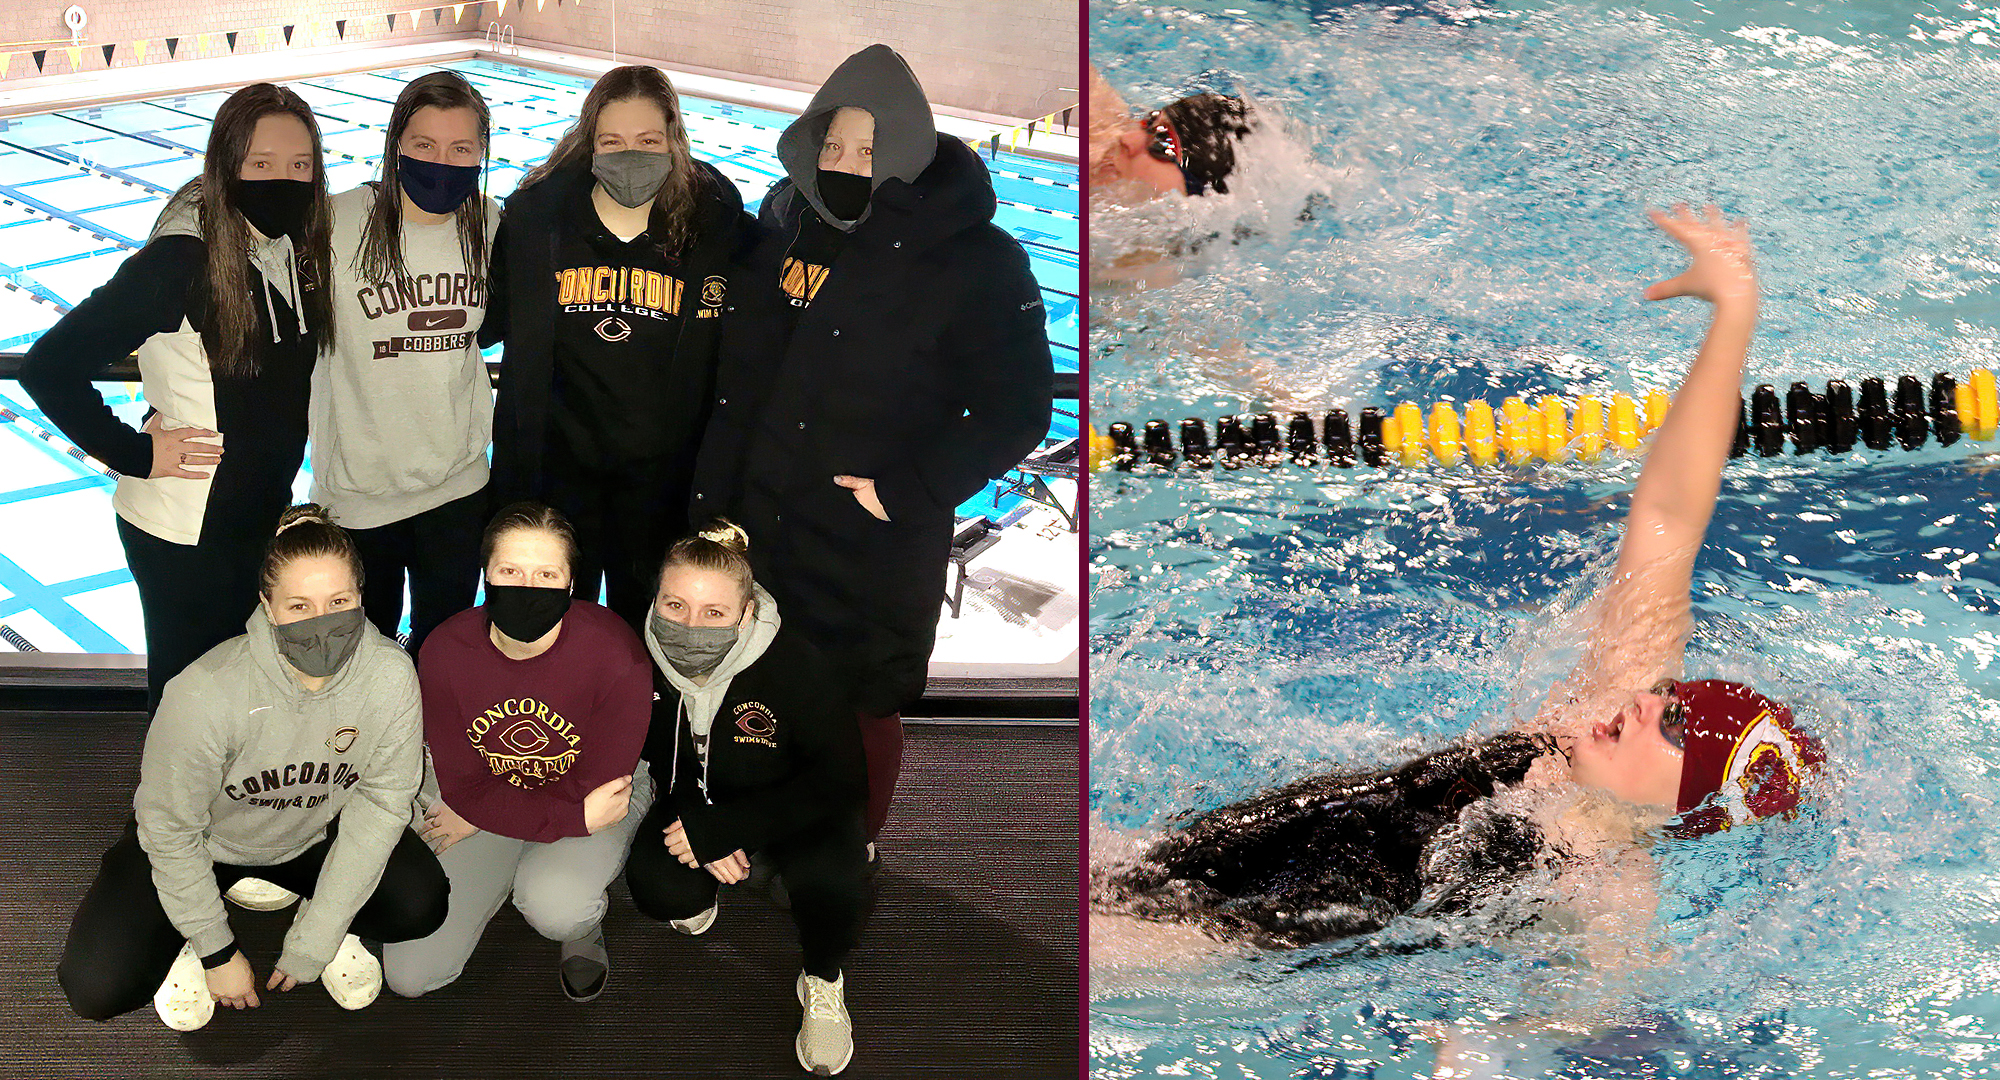 The Cobber swim & dive team poses for a pic after hearing up the Gustavus pool on Saturday. CC went 2-1 in dual competition and posted several impressive finishes.